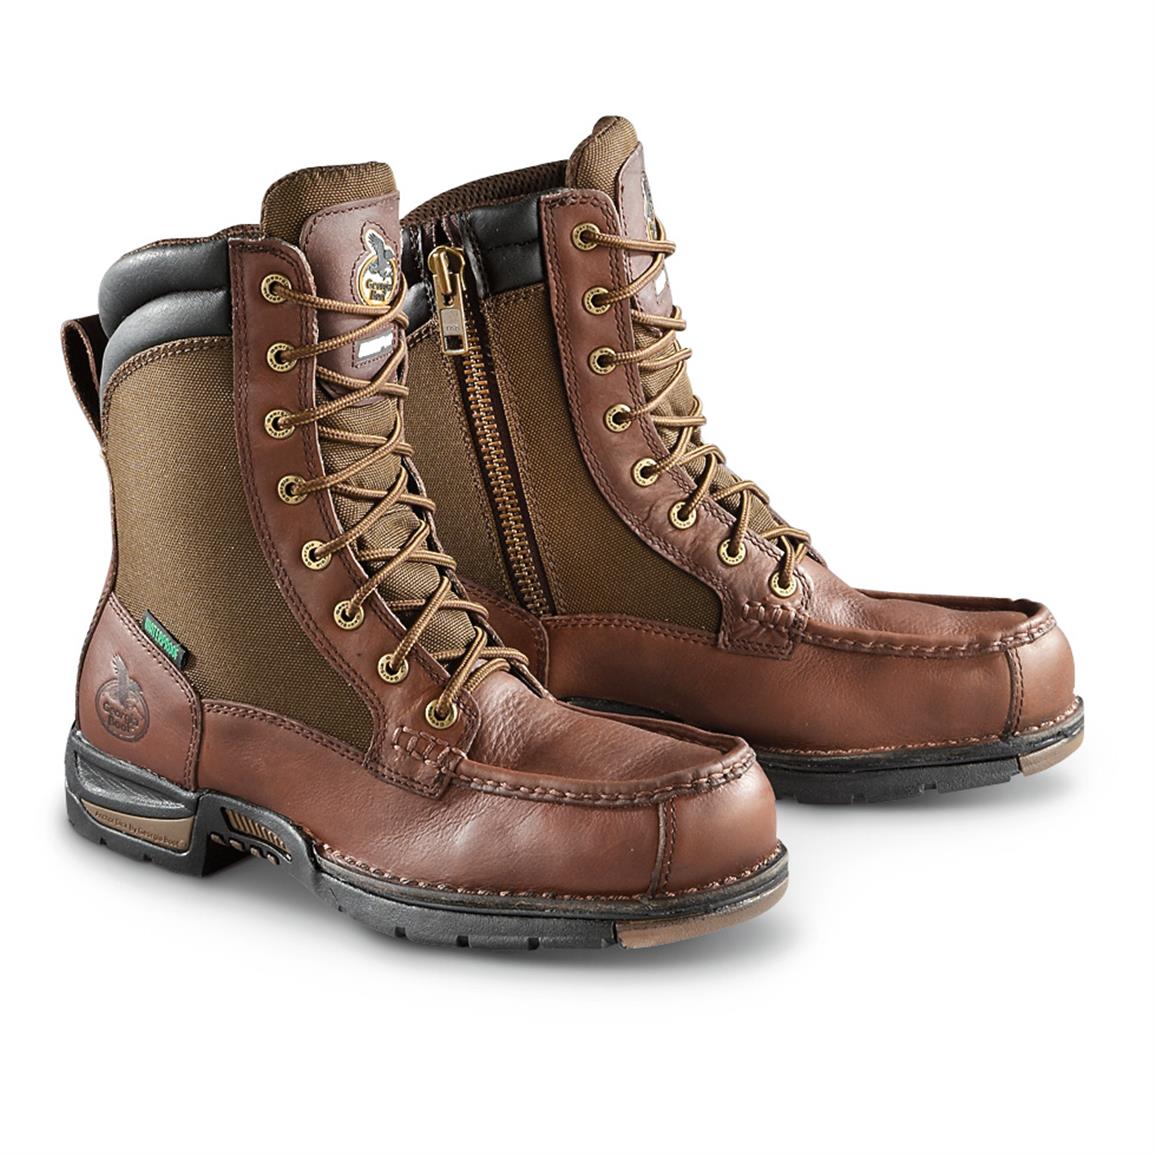 Georgia Athens Waterproof Work Boots, Brown - 621587, Work Boots at ...